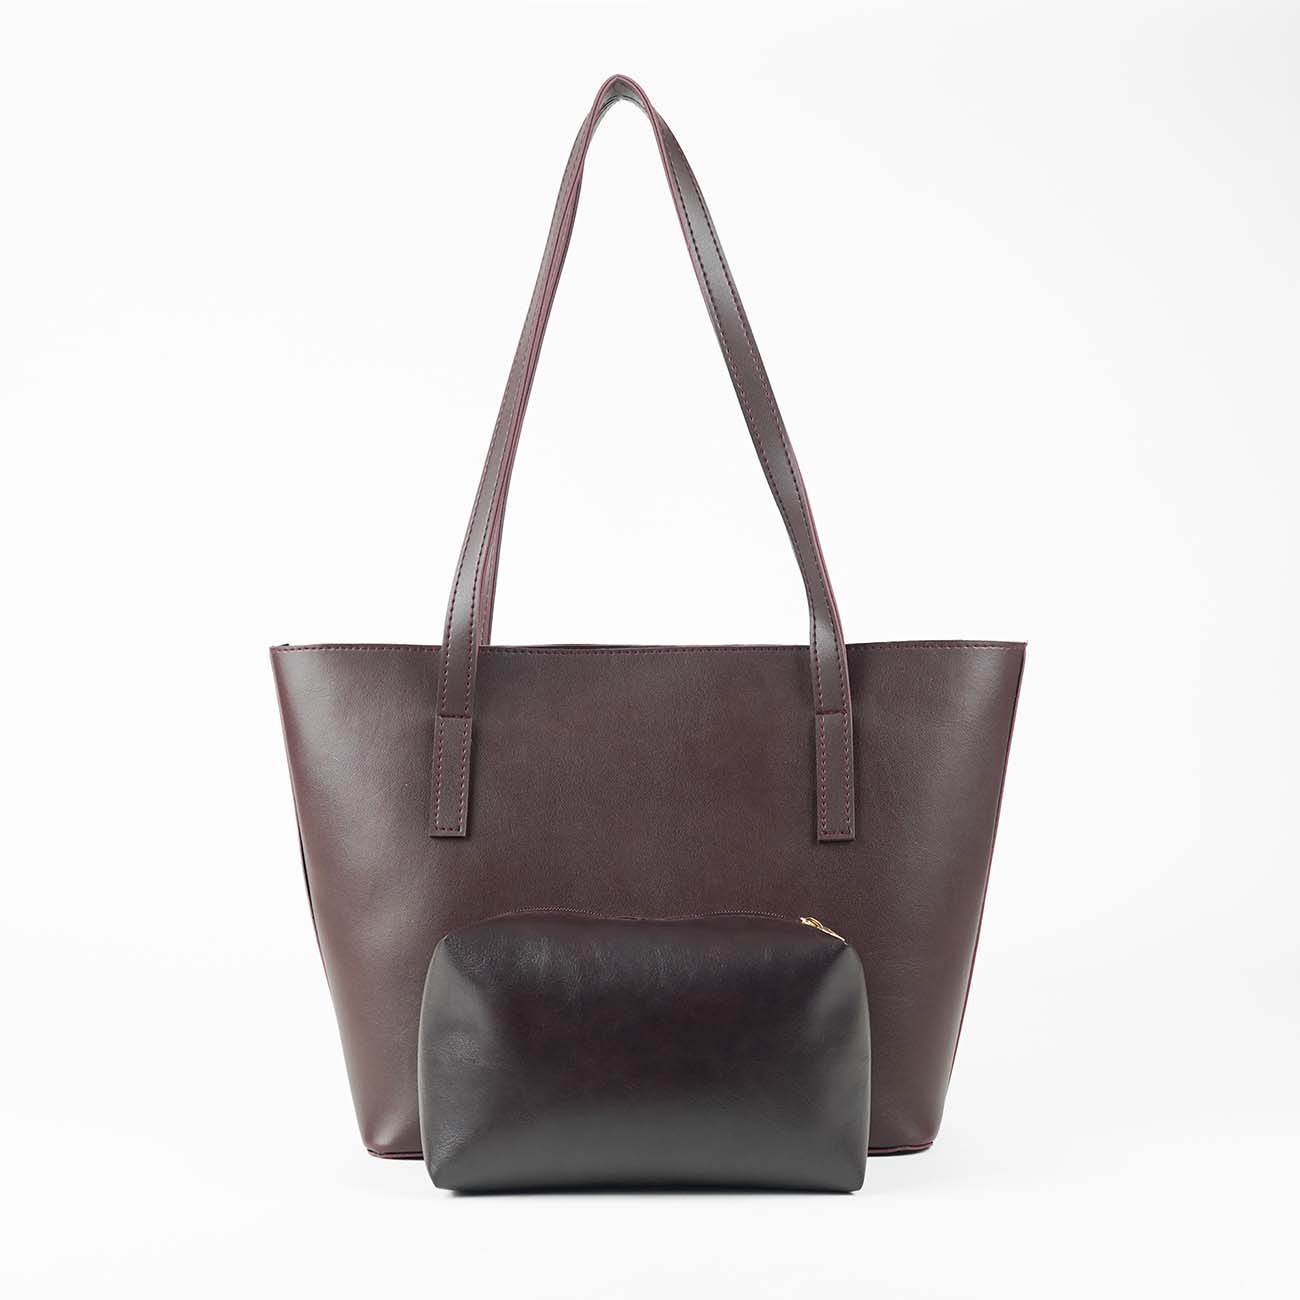 Carry tote Set of 2 bag Maroon